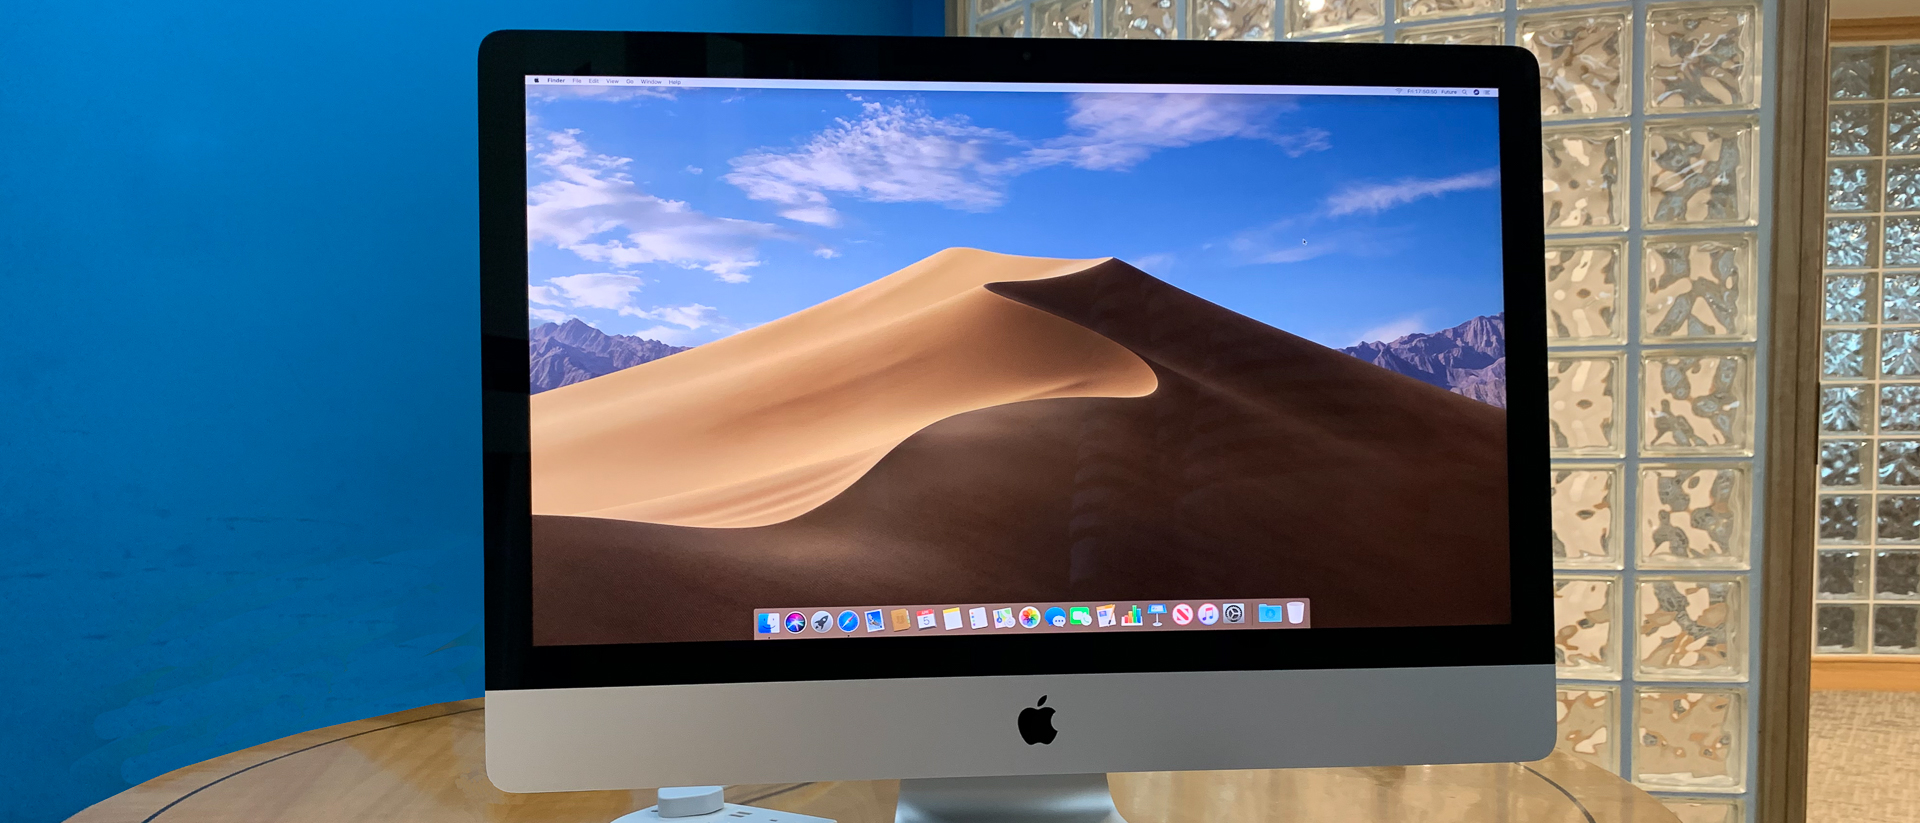 Performance, features and verdict - Apple iMac (27-inch, 2019 